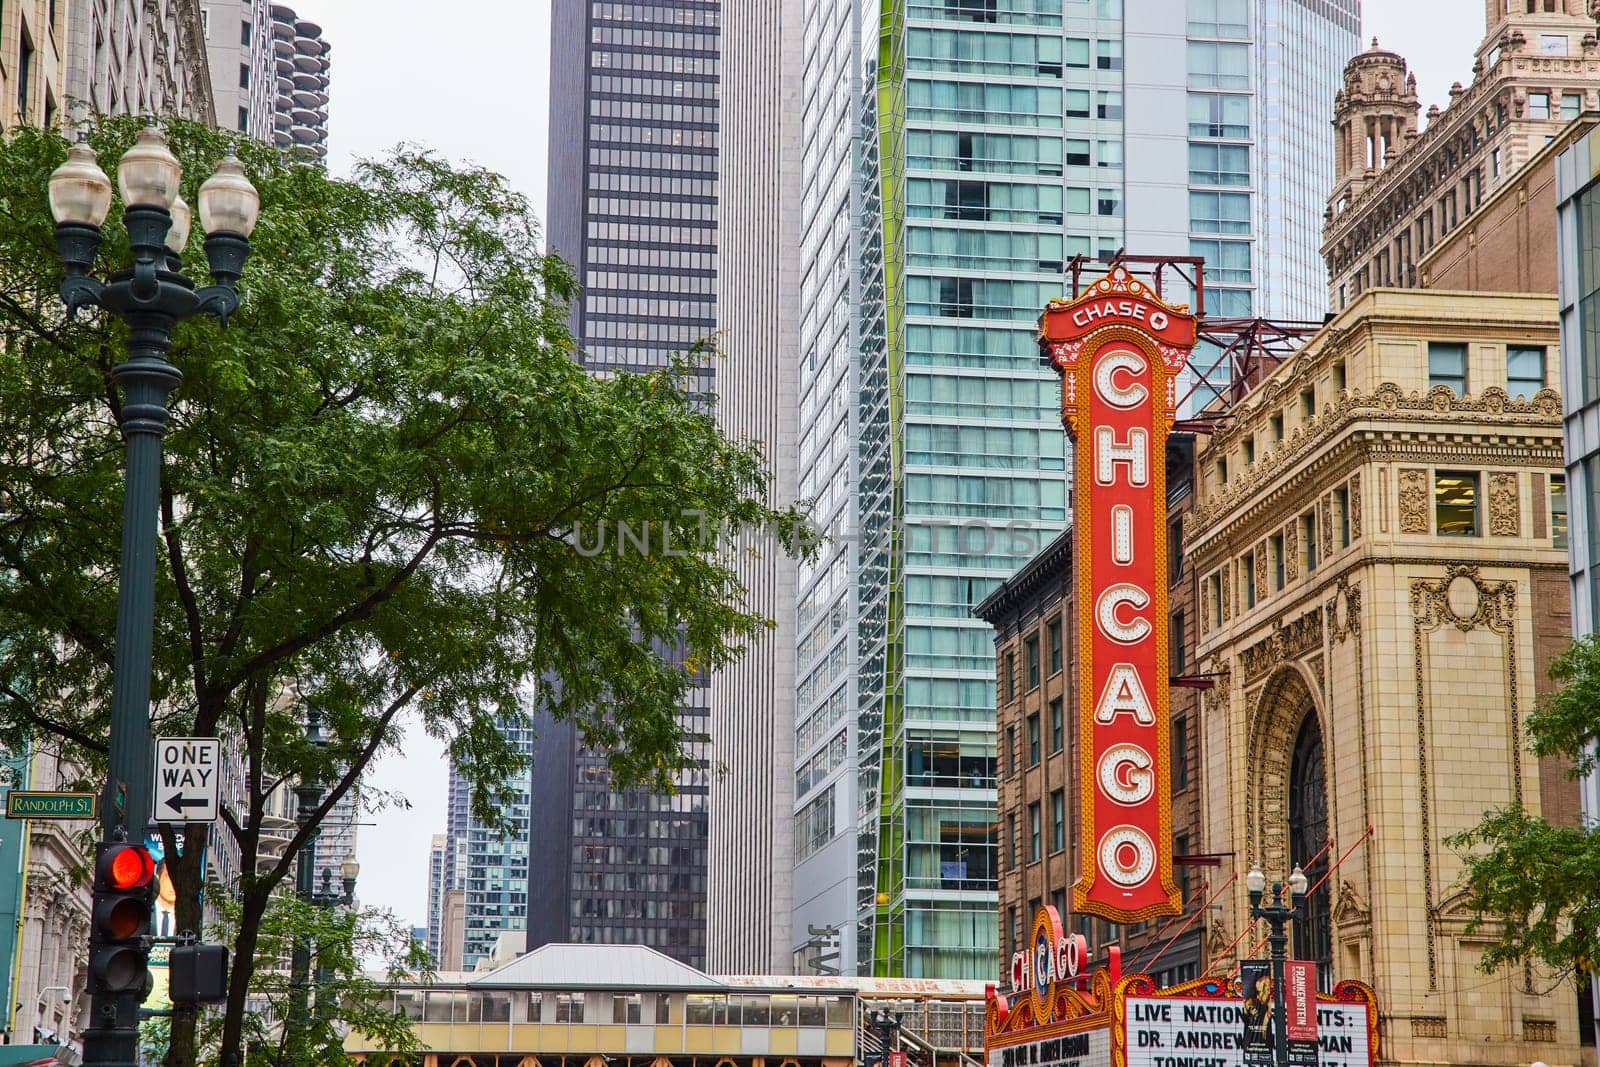 Image of Large orange sign with Chicago in white lettering in downtown of city, historic building